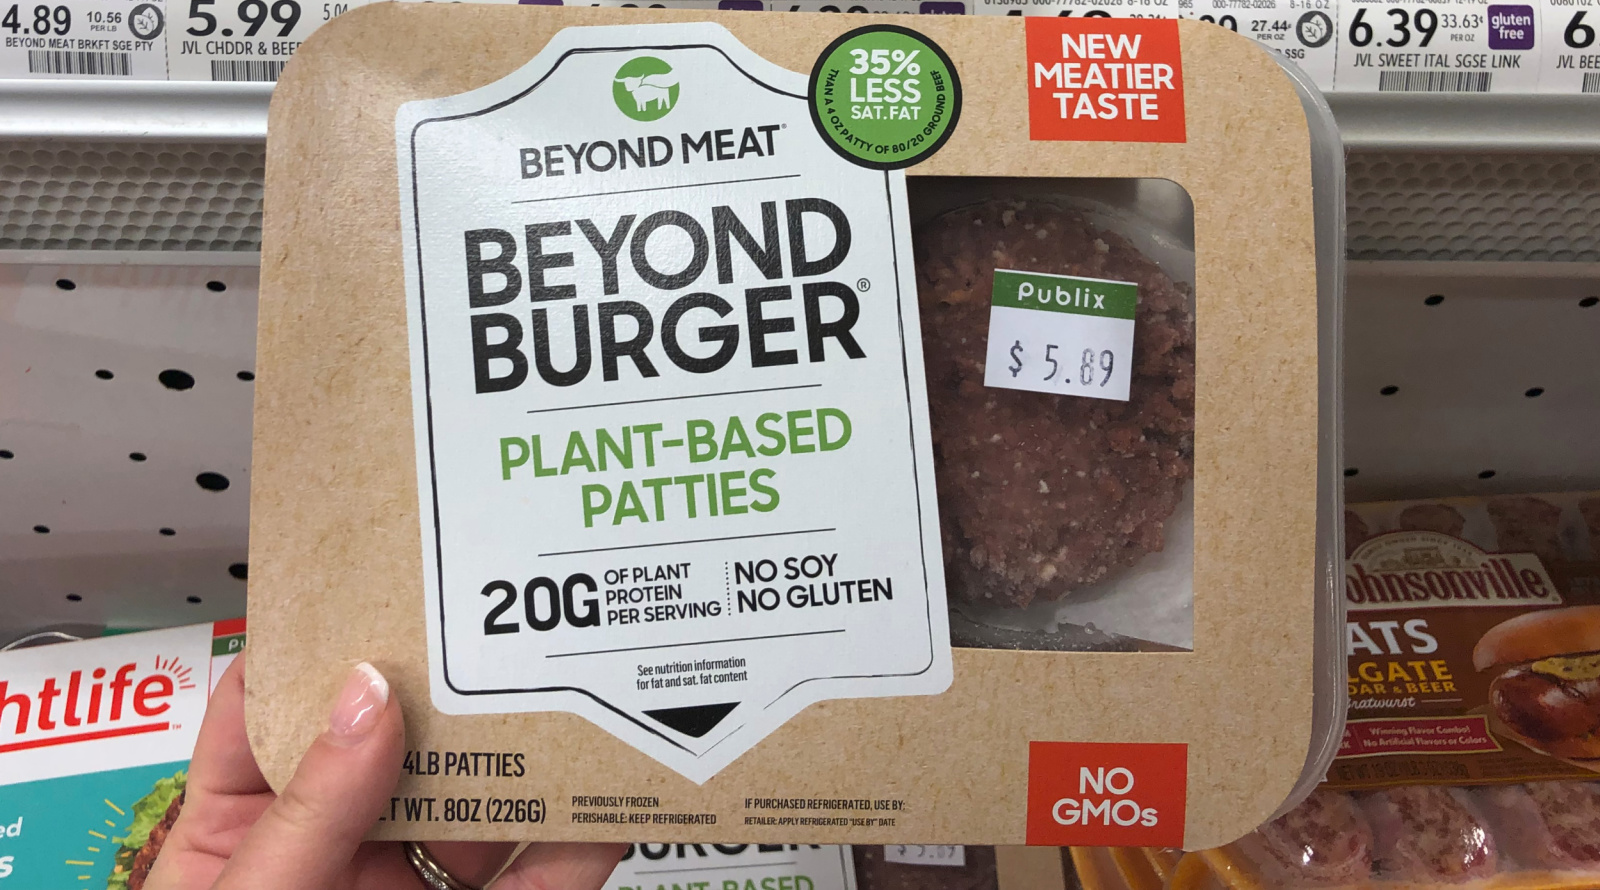 Pick Up Beyond Meat Beyond Burger As Low As 95¢ At Publix on I Heart Publix 1